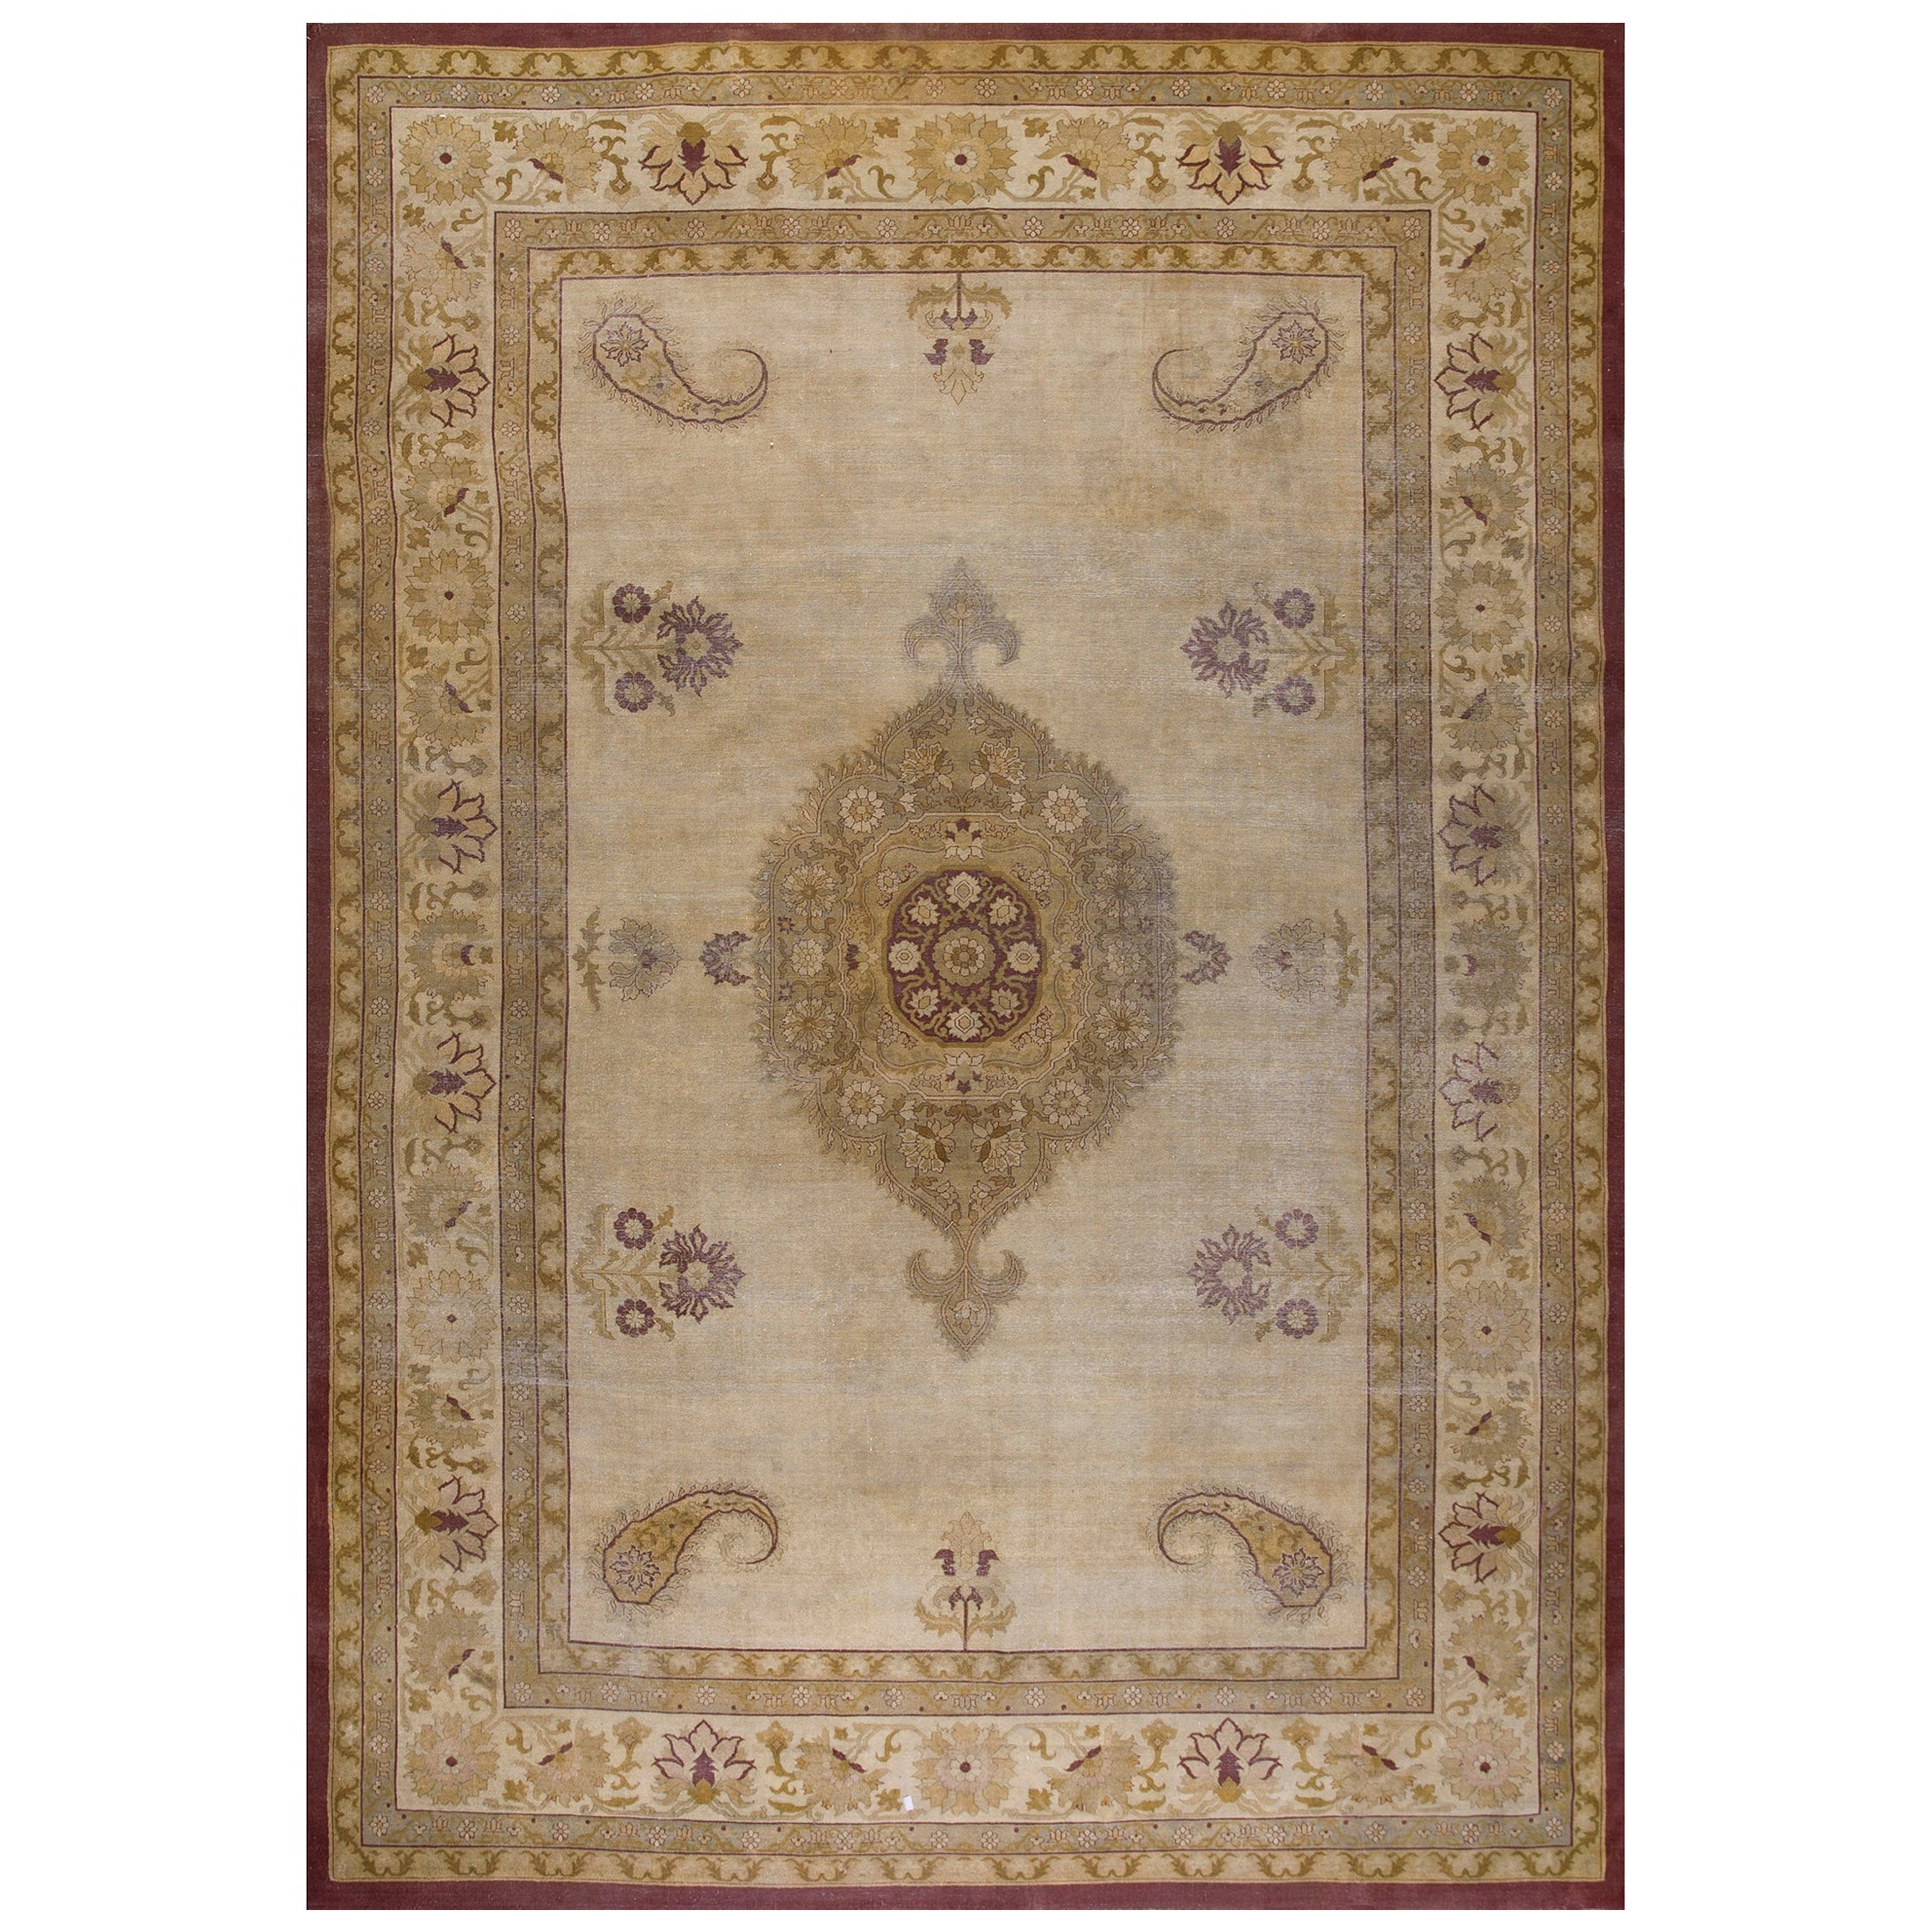 Early 20th Century N. Indian Amritsar Carpet ( 9'6'' x 13'8'' - 290 x 417 ) For Sale